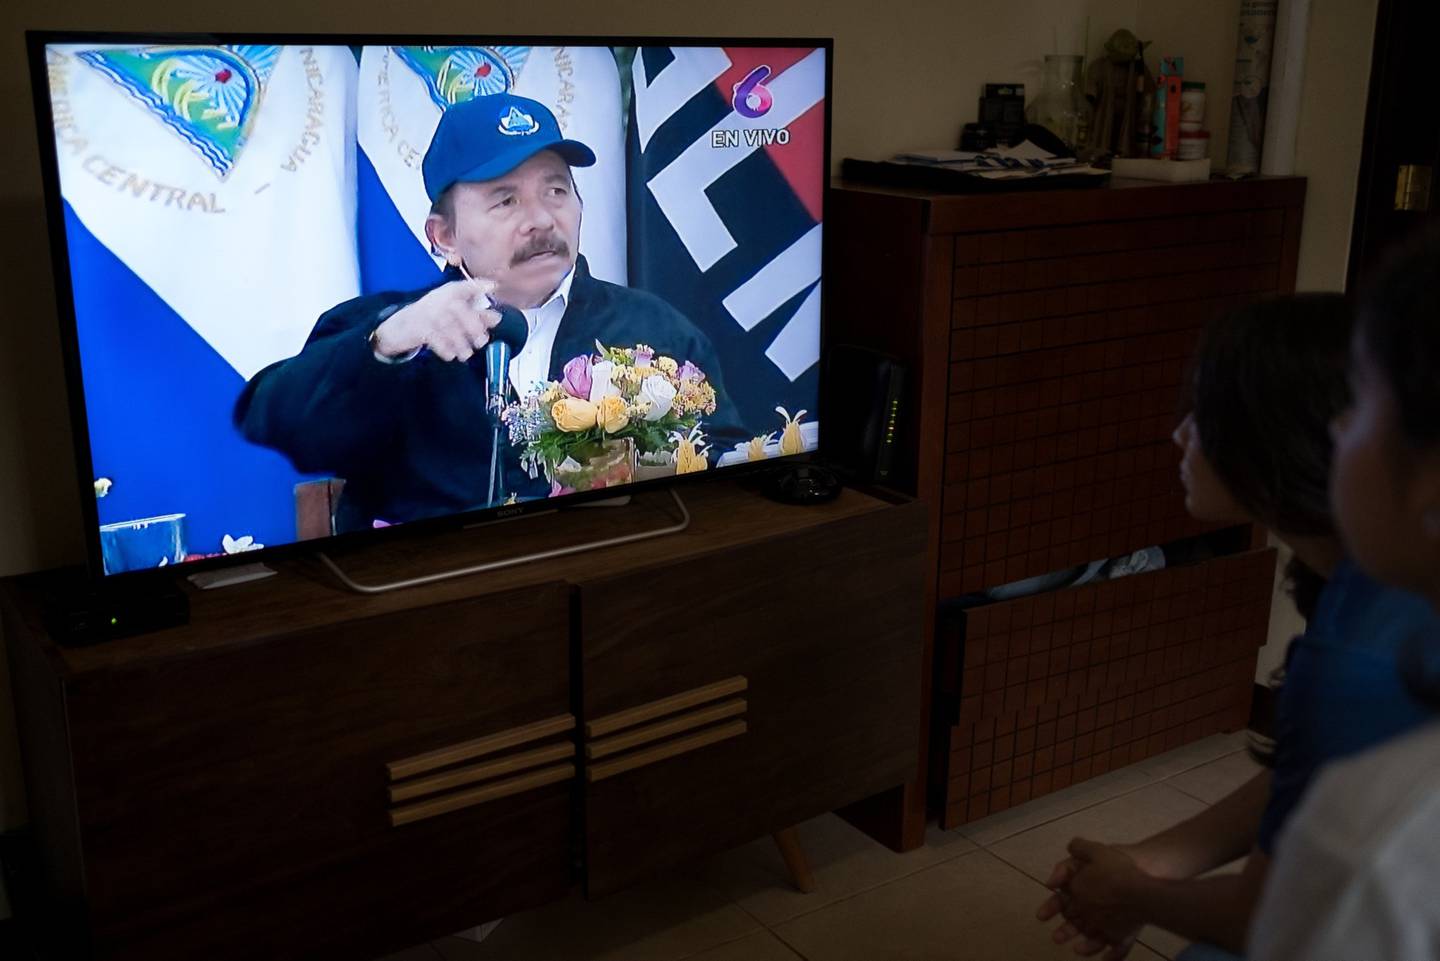 The president of Nicaragua in a televised speech in April 2020.